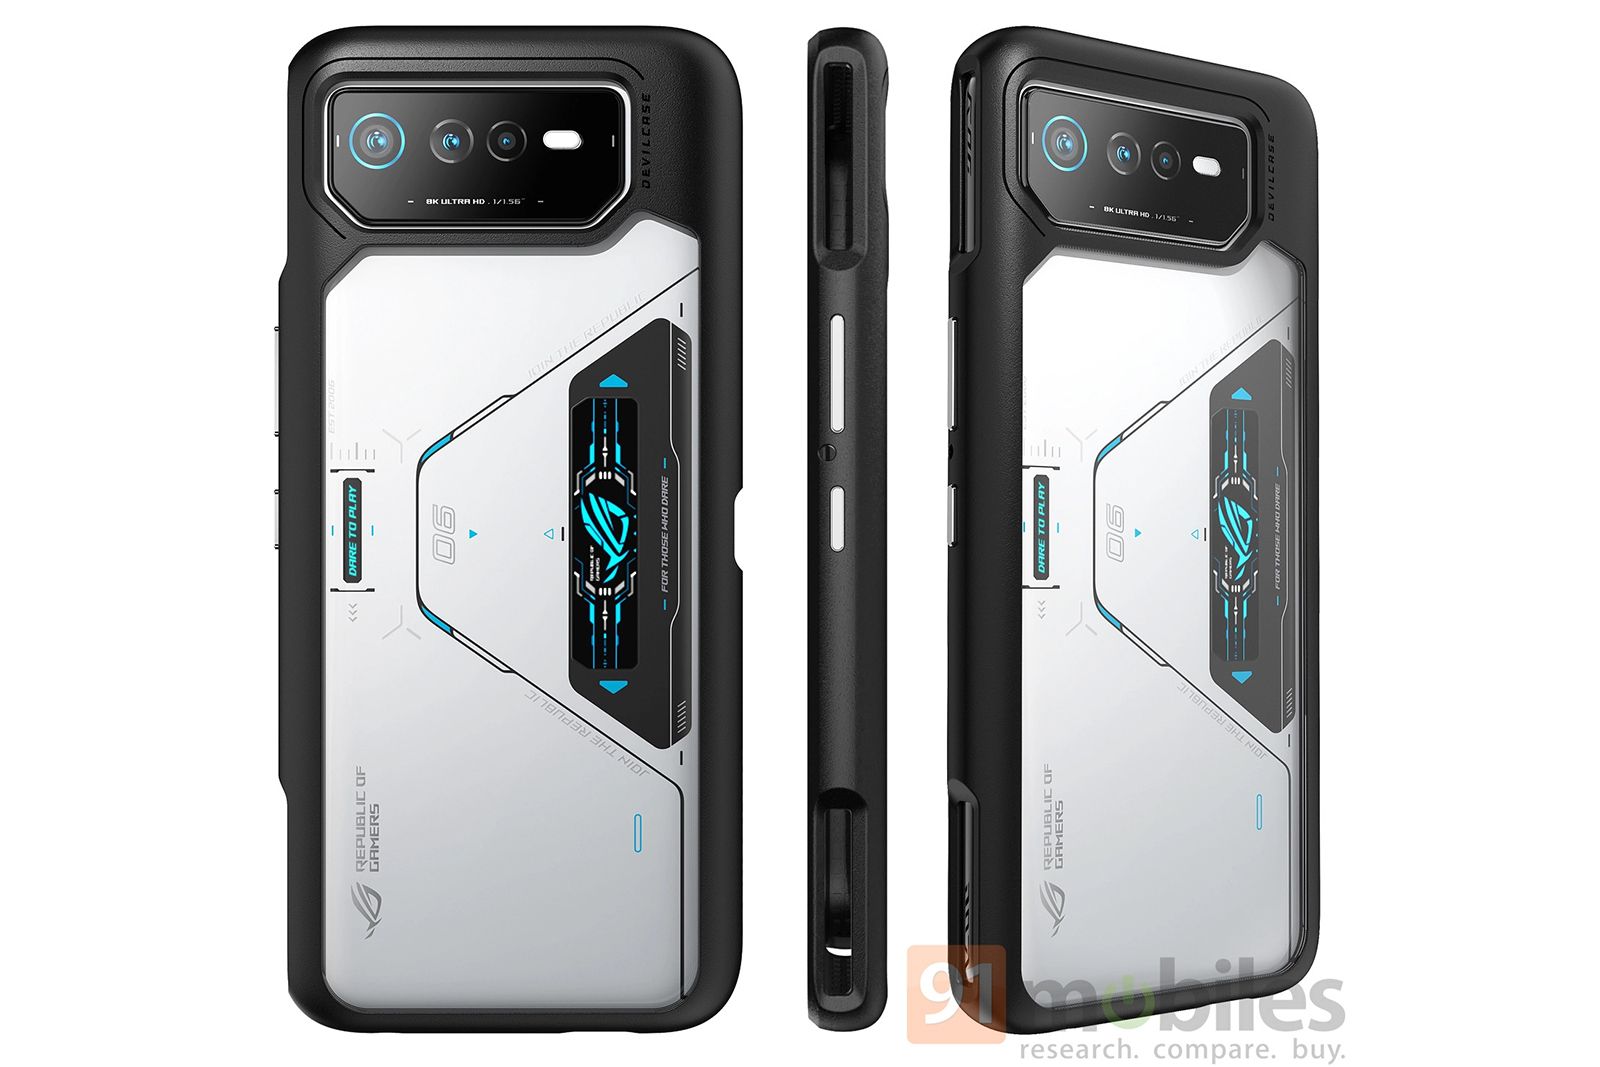 New Asus ROG Phone 6 pictures reveal design and accessories photo 1